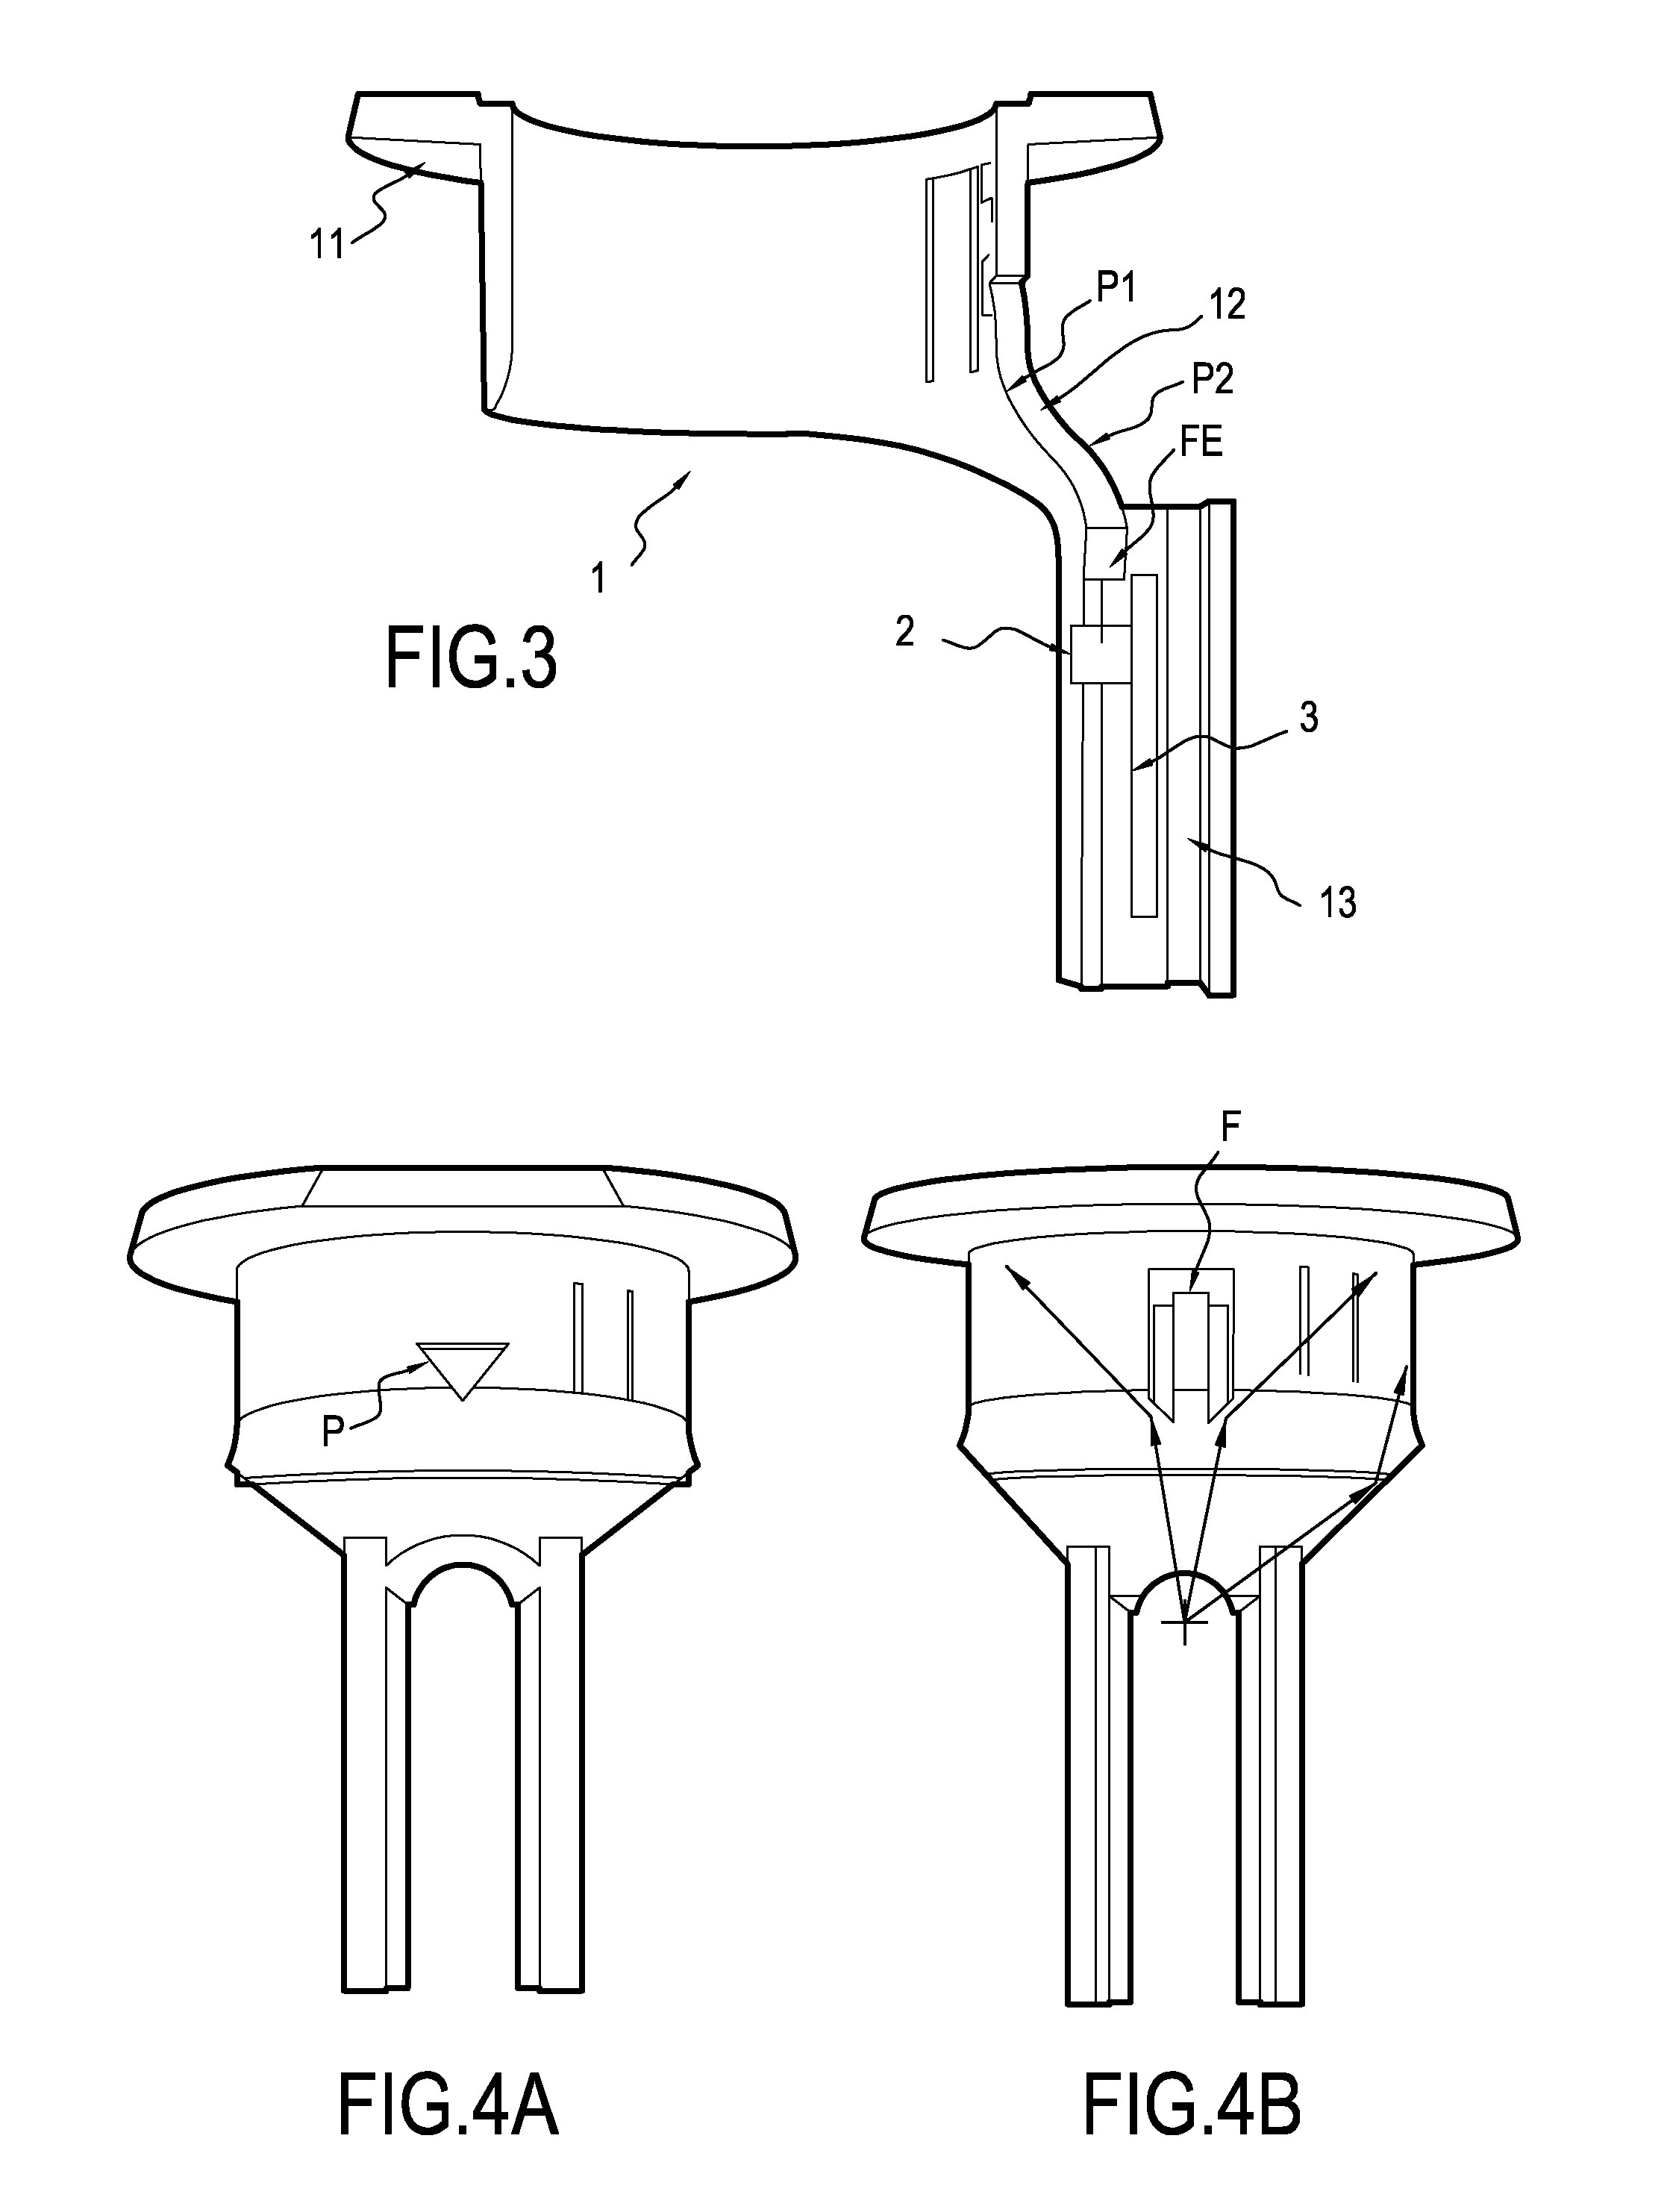 Illumination device for a cigar lighter or multifunction electric socket